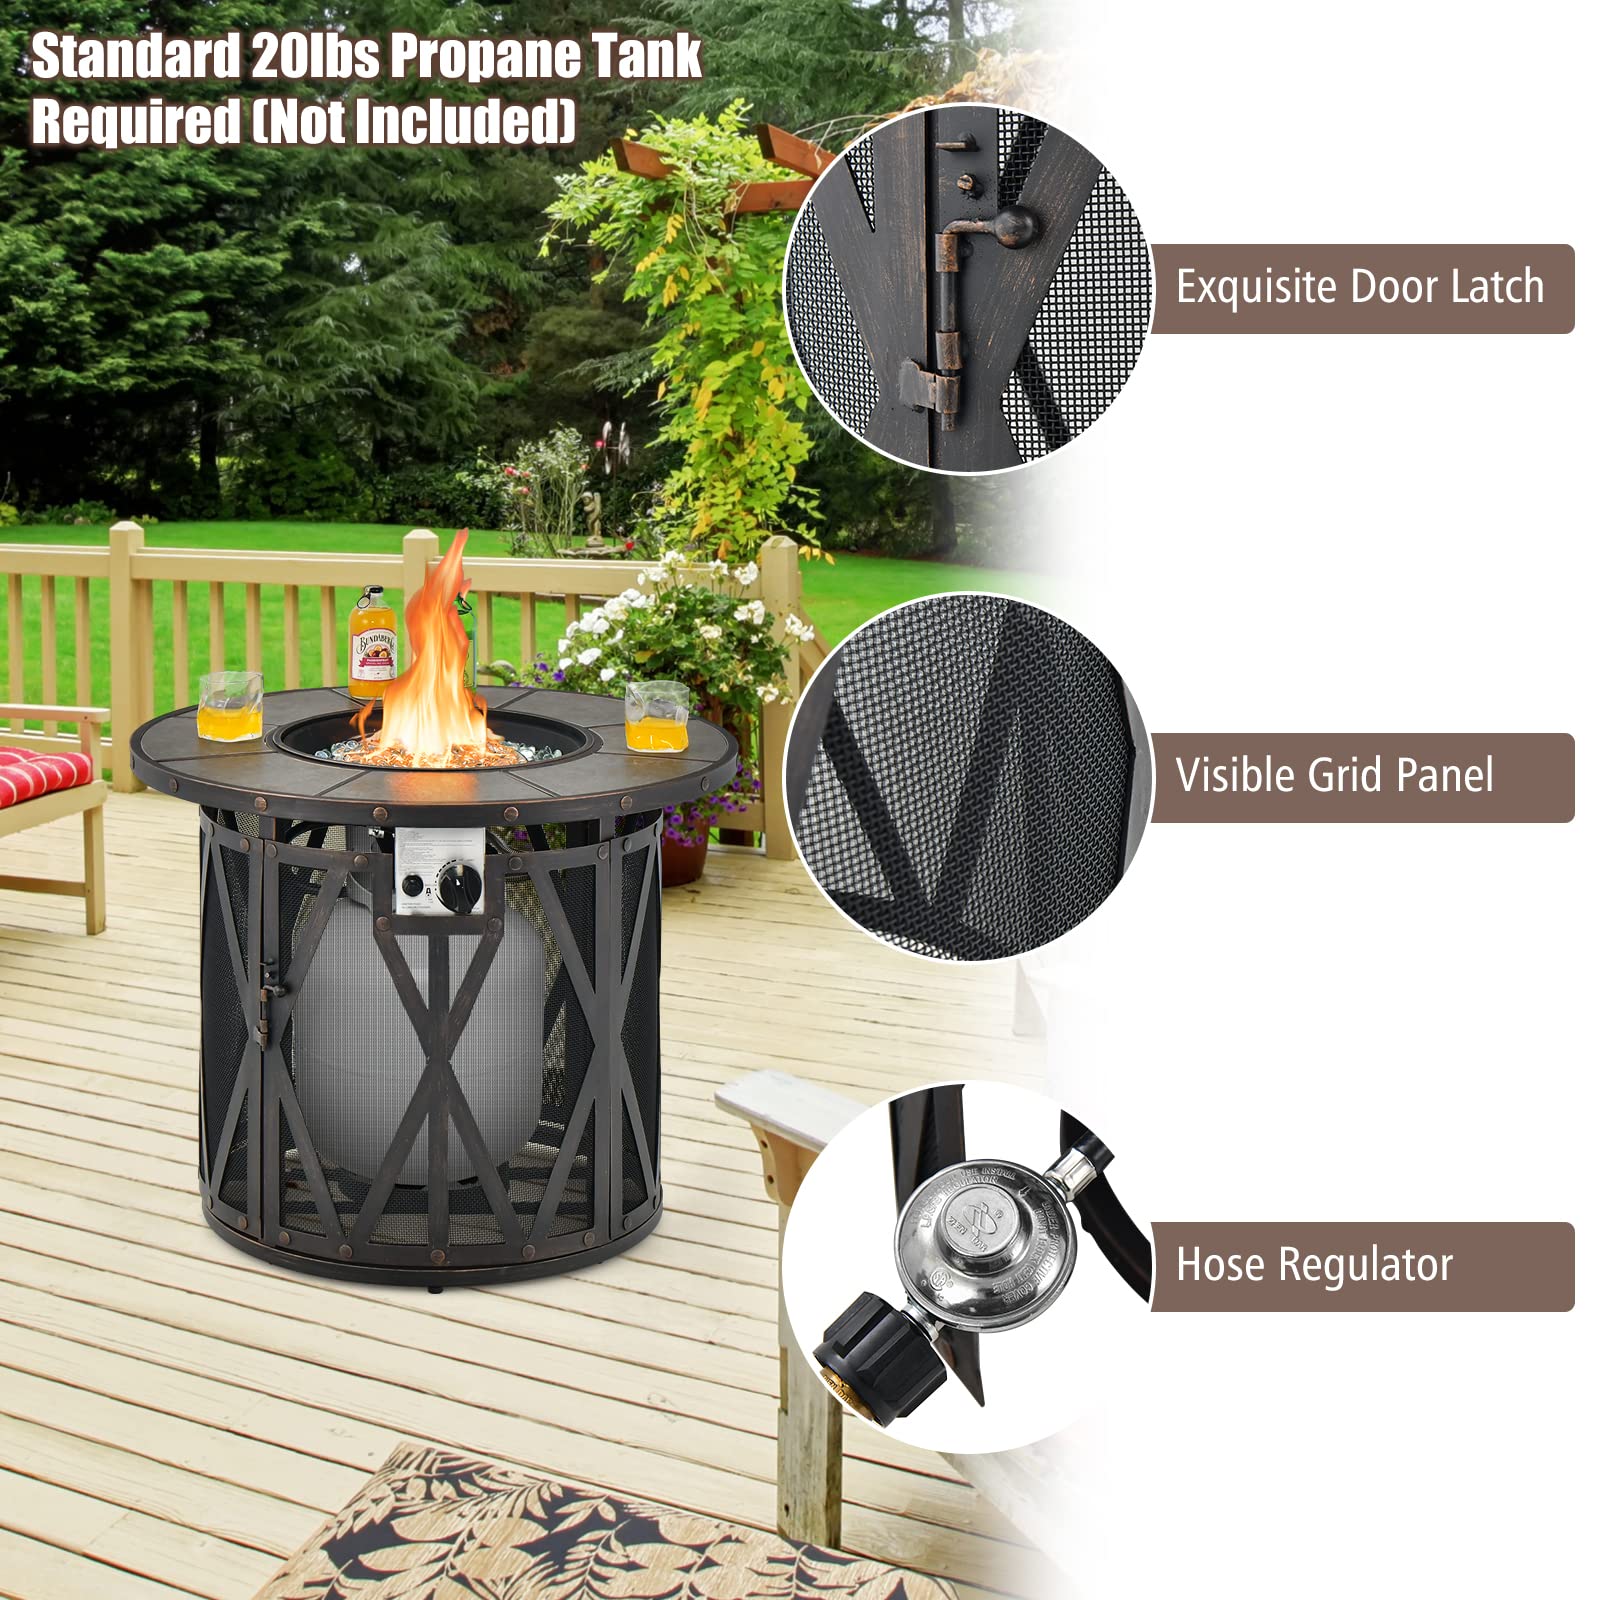 Giantex 32" Gas Fire Pit Table - 30,000 BTU Round Outdoor Fire Pit with Lid, PVC Cover, Glass Stones, Black